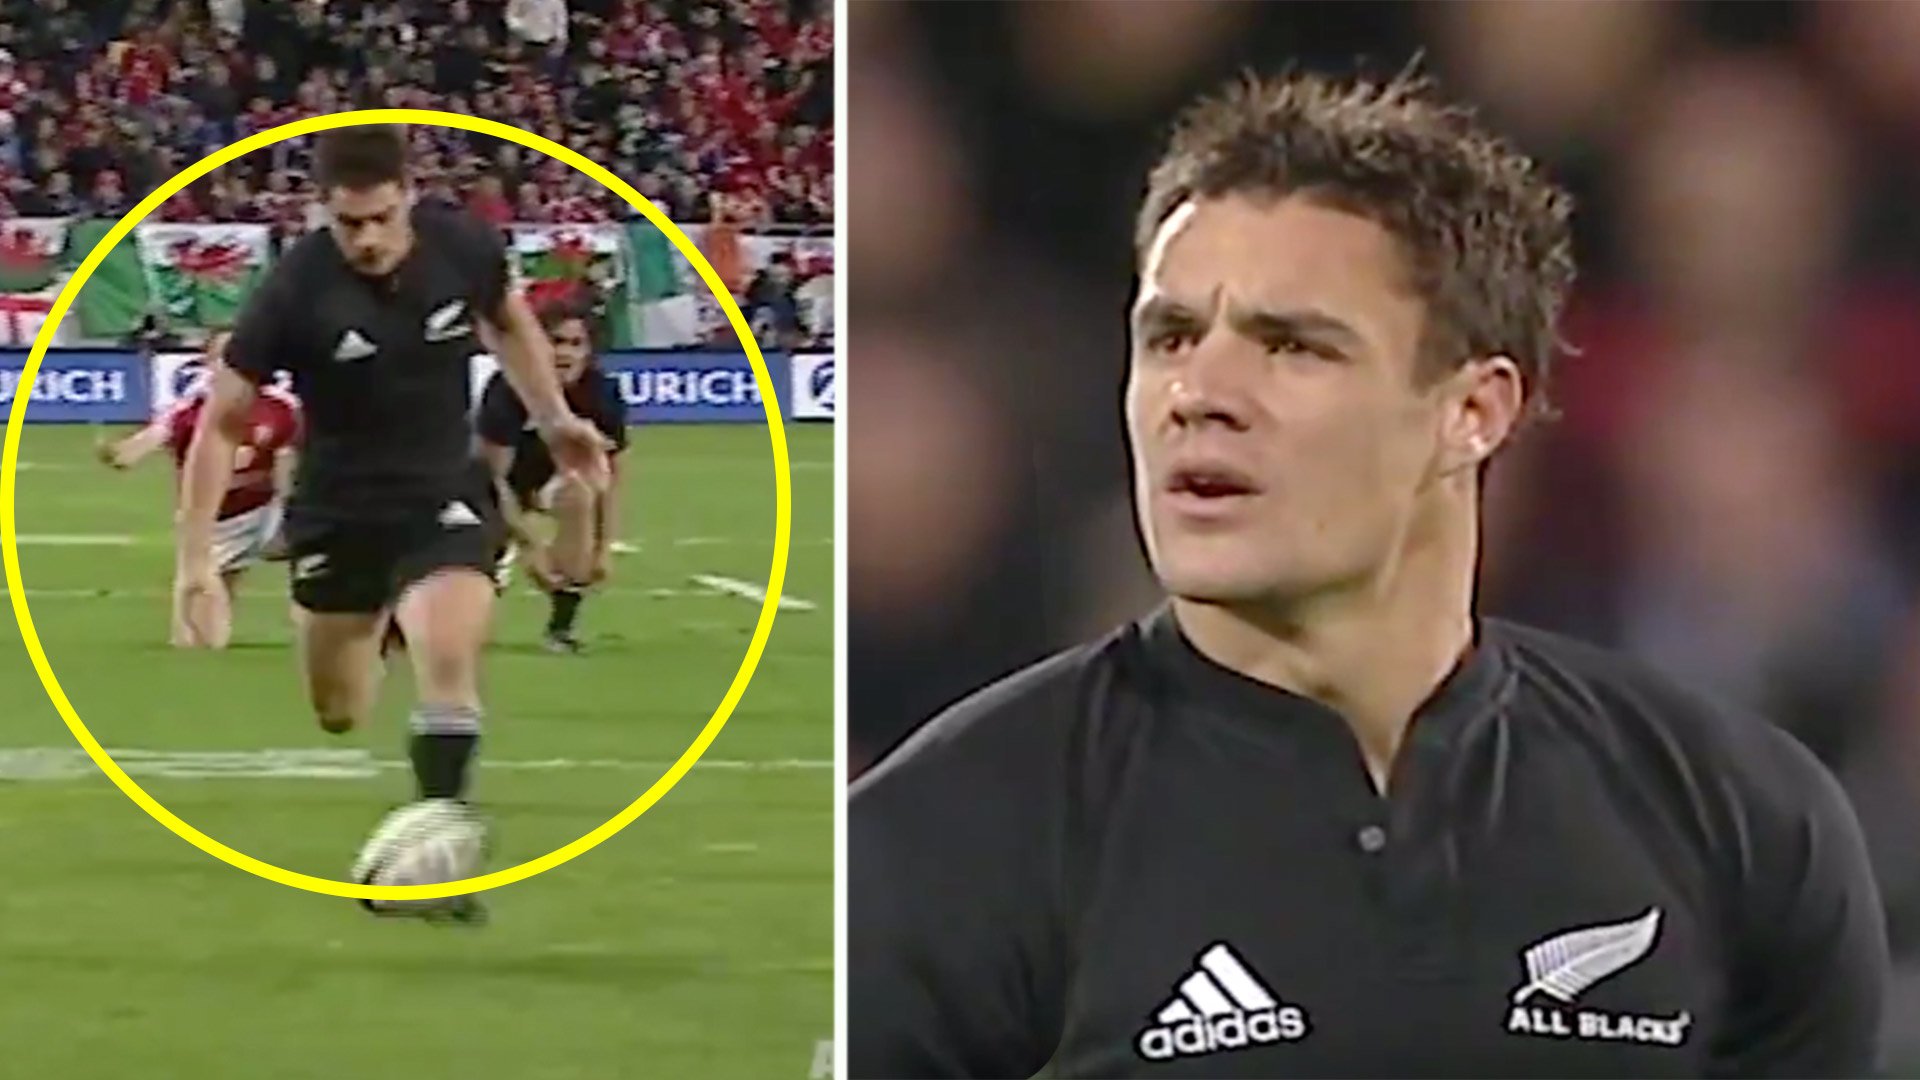 The All Blacks release full footage of Dan Carter and his "perfect" game against the Lions in 2005